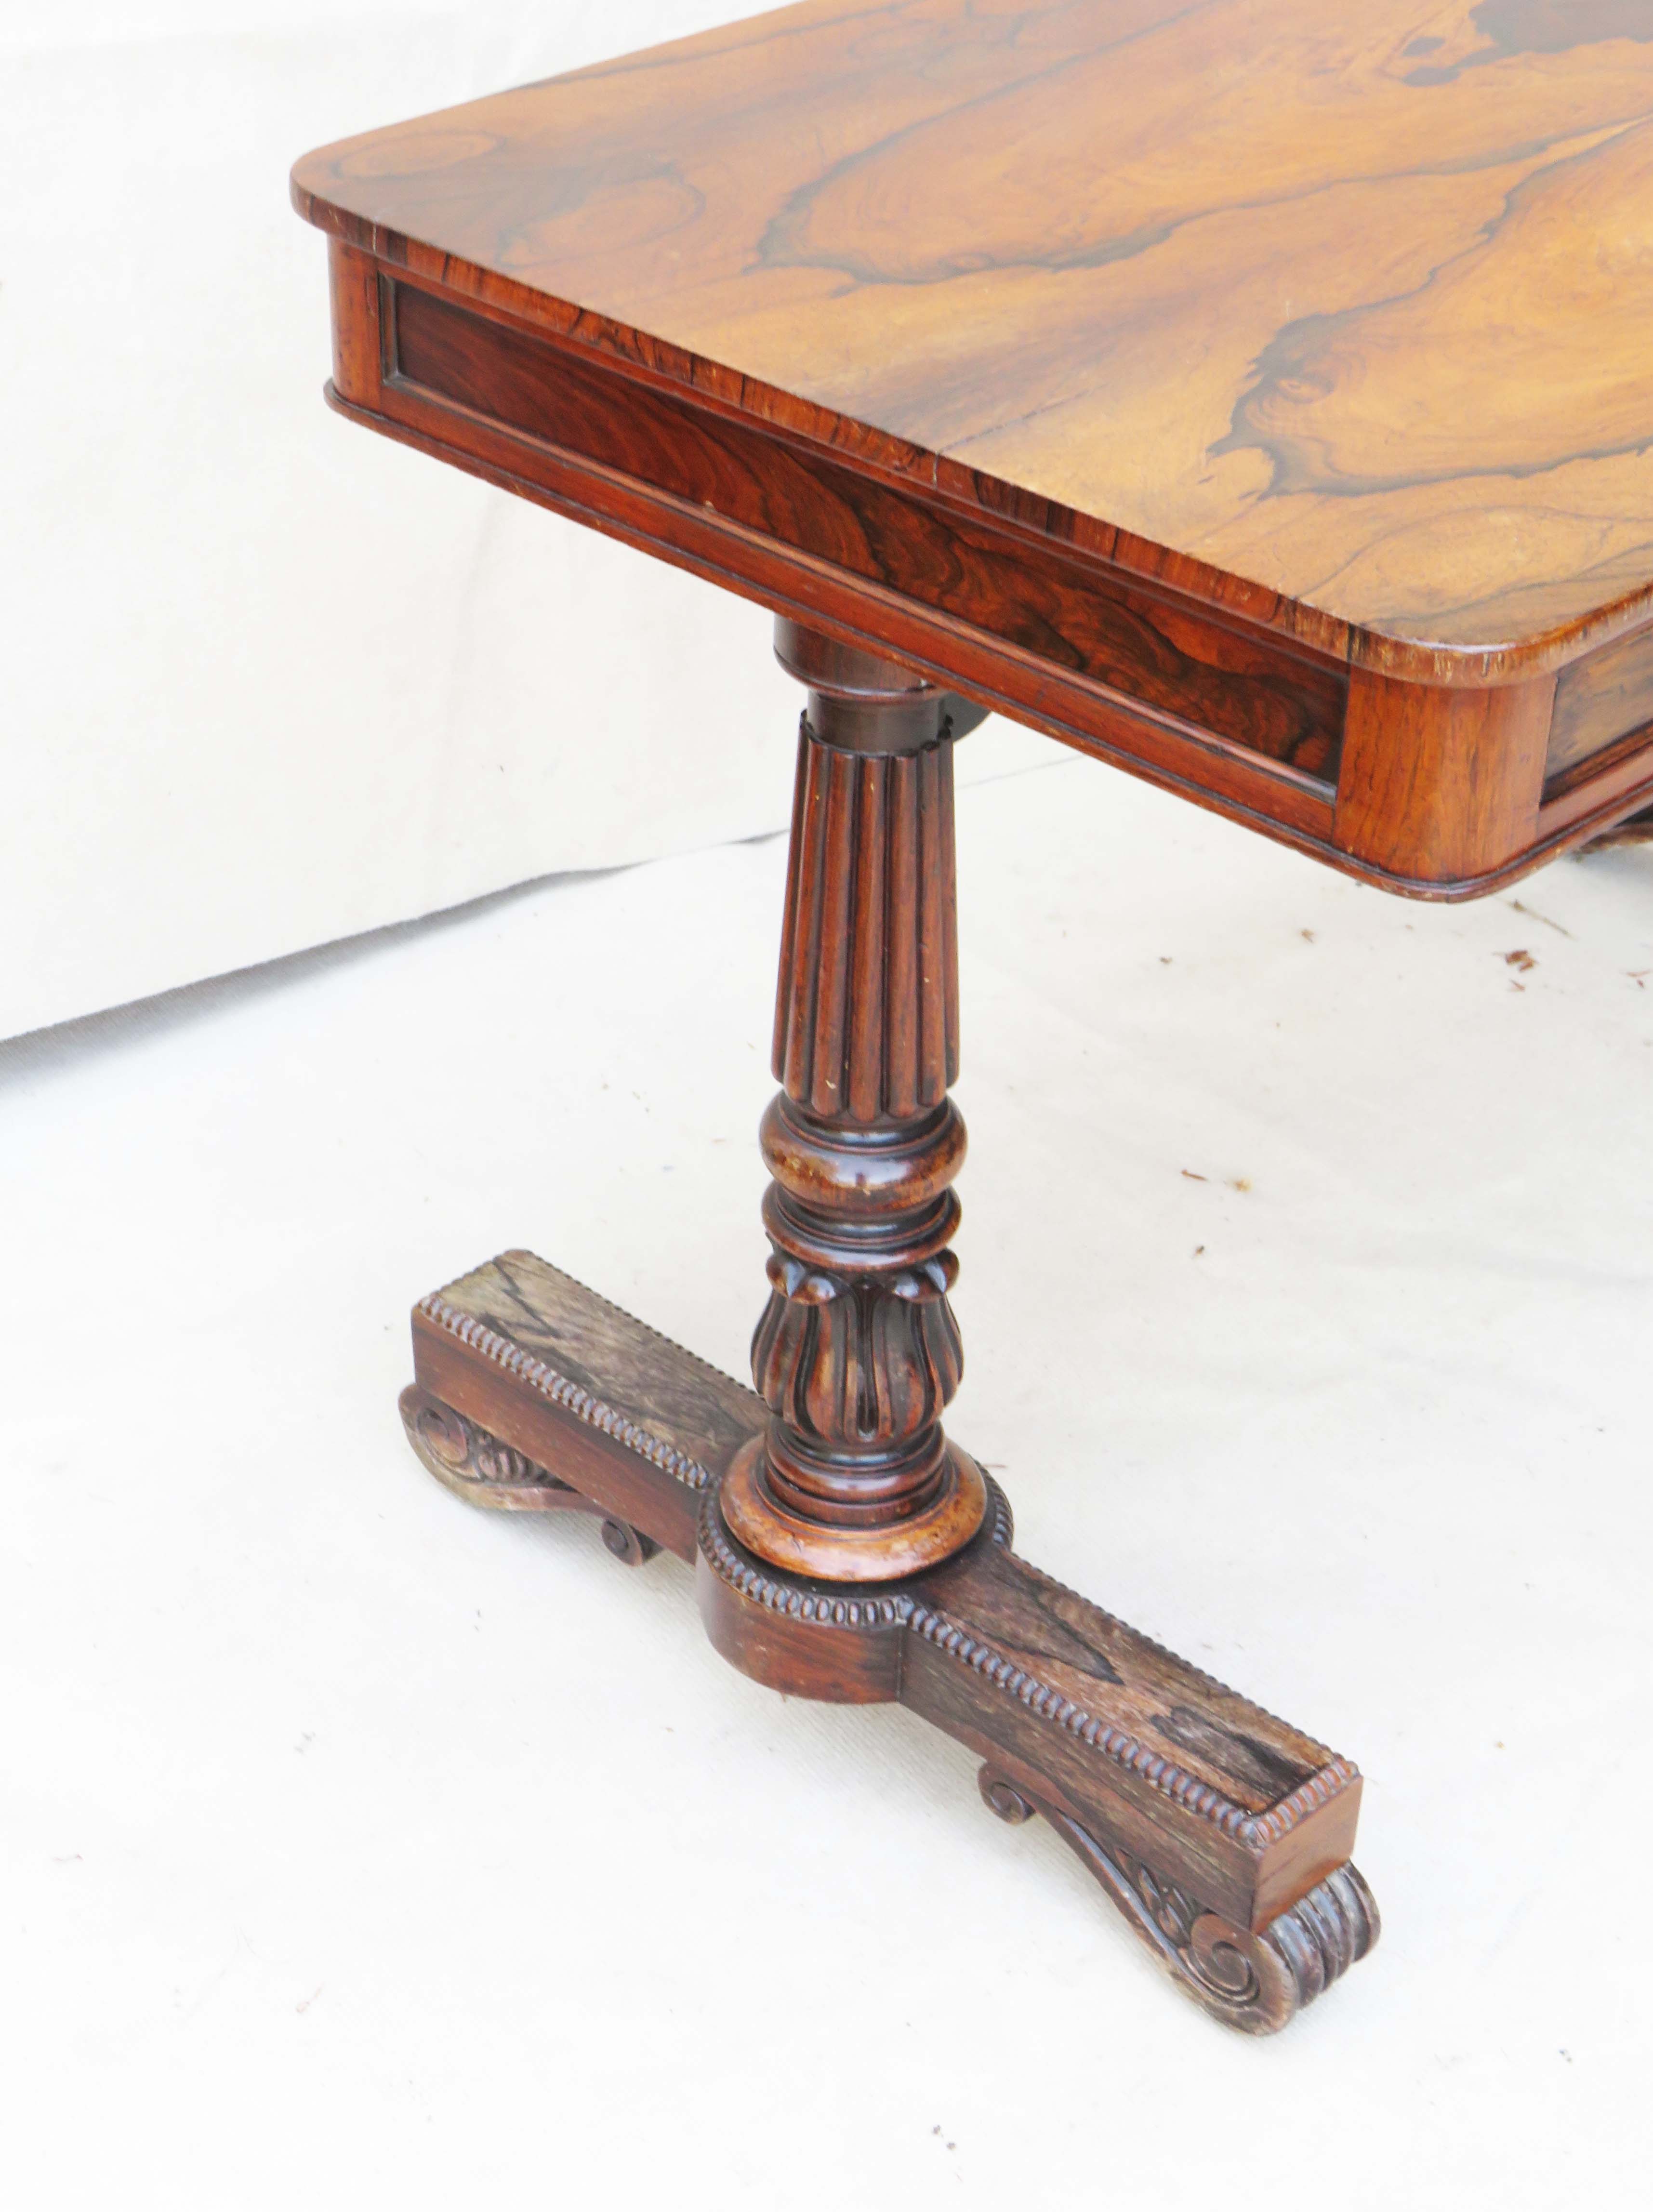 Regency period 19th Century rosewood library table - Image 8 of 8